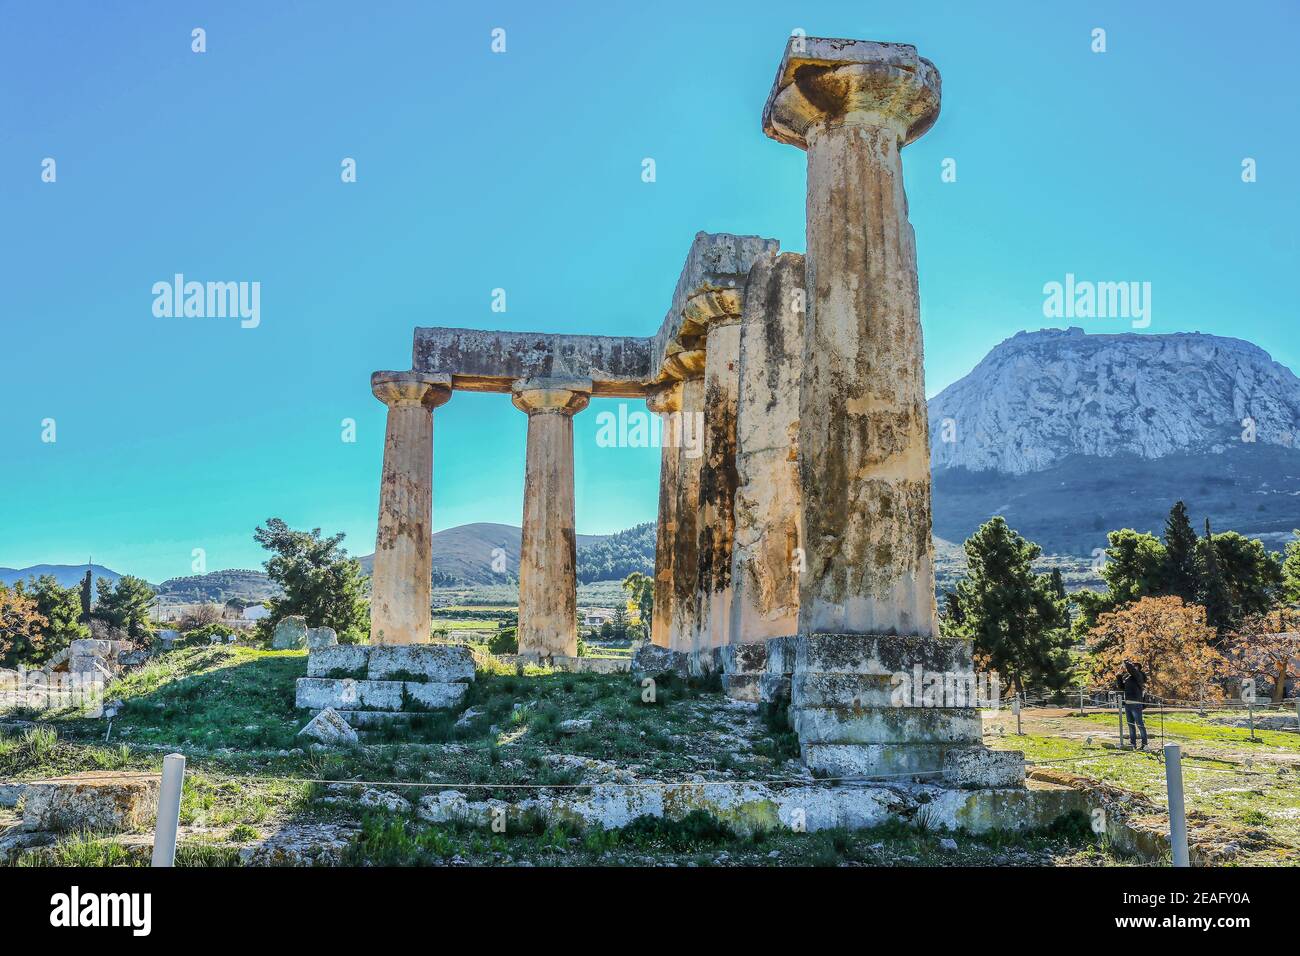 Columns in ruins of Temple of Apollo with Acrocorinth the acropolis of ancient Corinth - a monolithic rock overseeing the ancient city of Corinth Gree Stock Photo